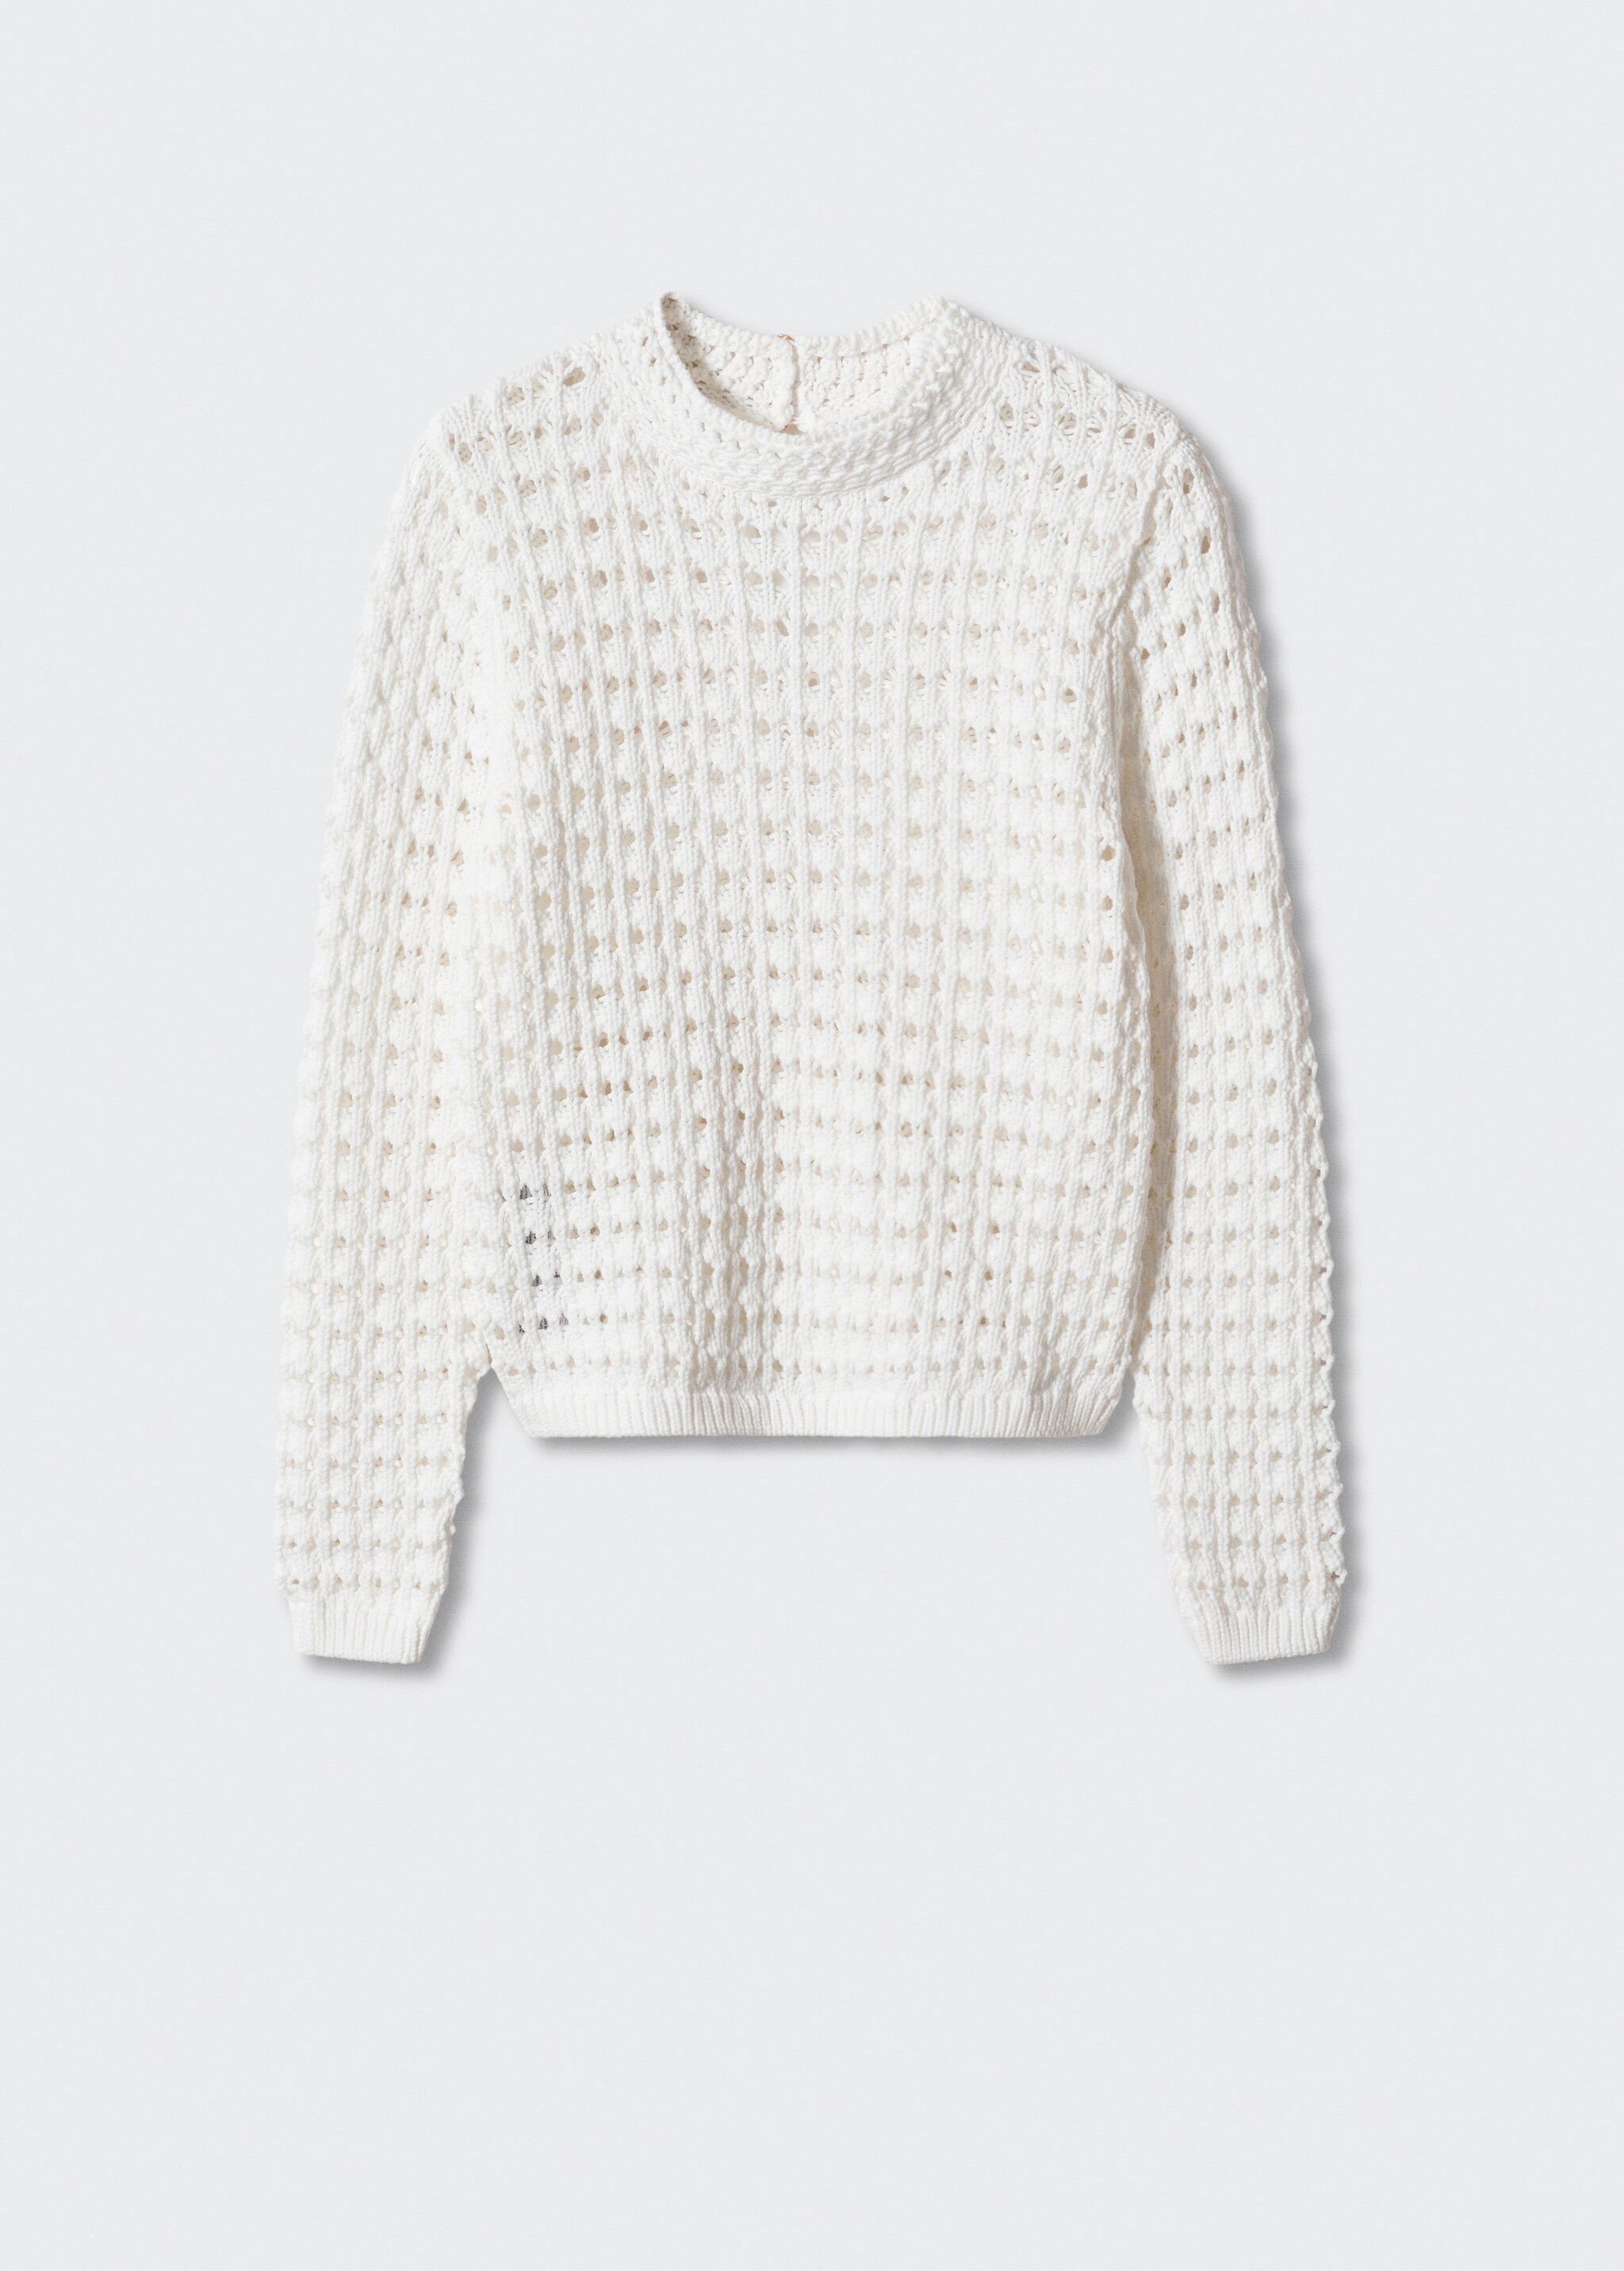 Openwork sweater with perkins collar - Article without model